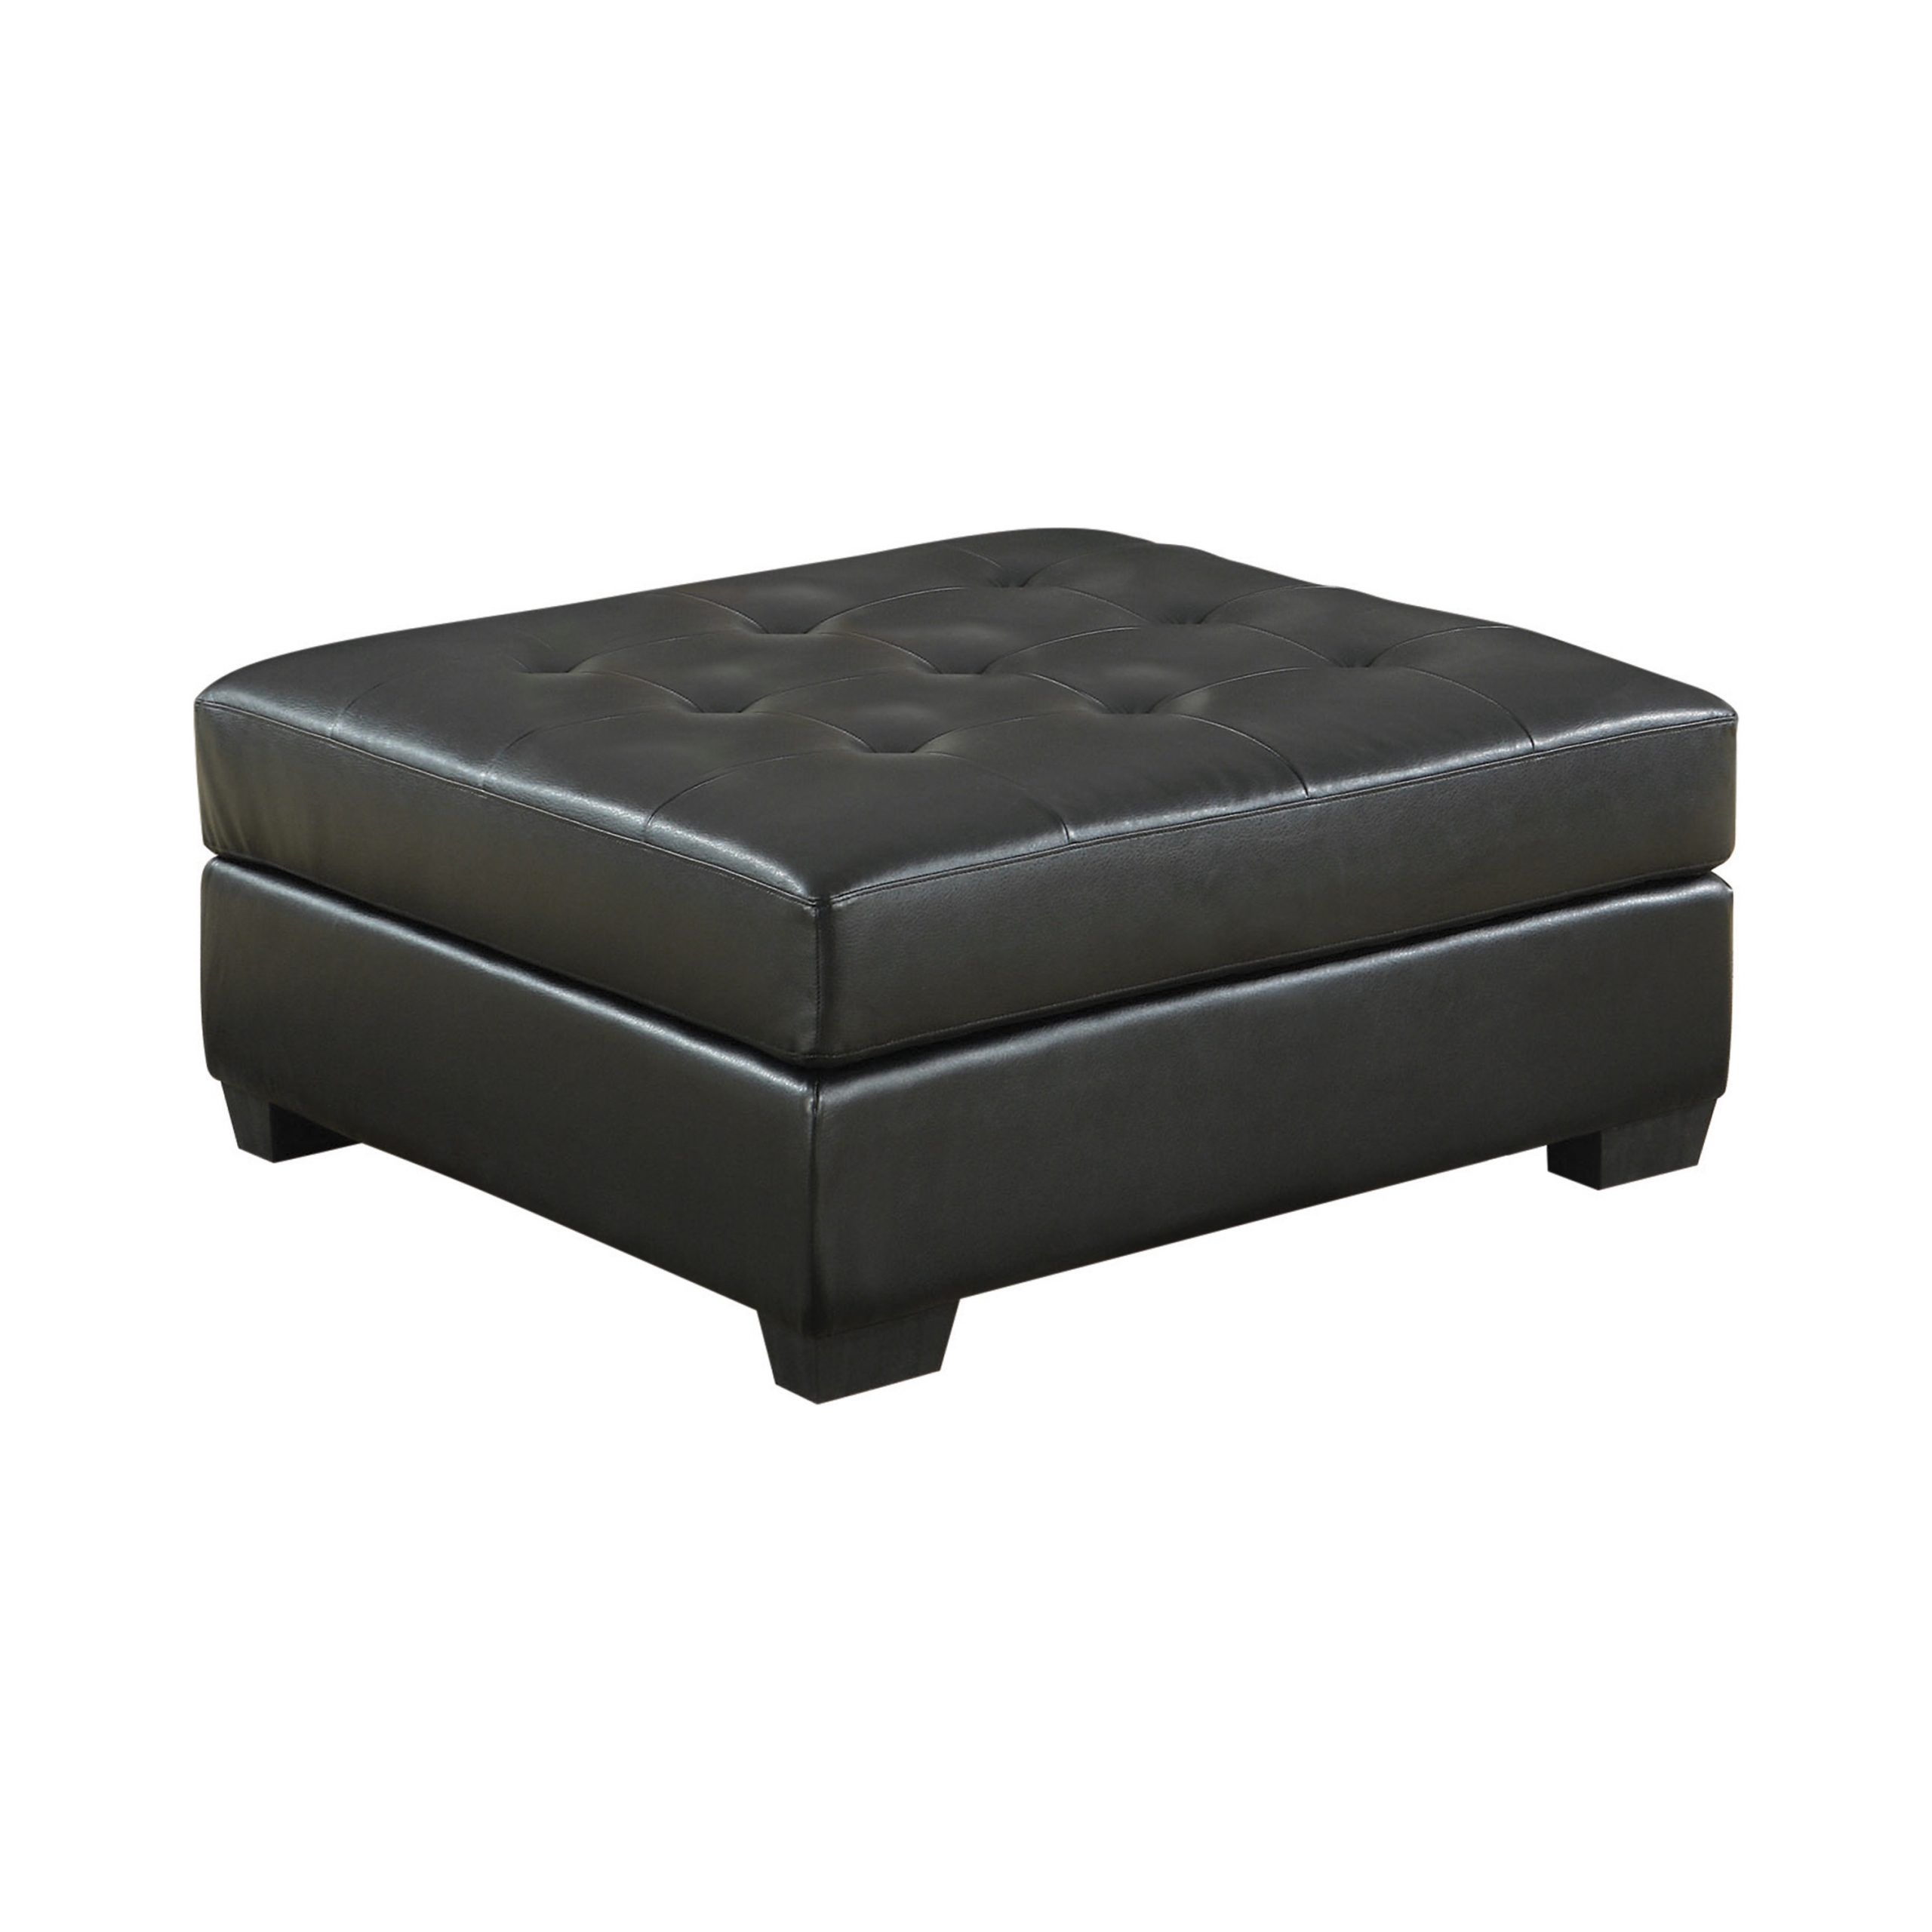 Darie Square Tufted Ottoman Black – Coaster Fine Furniture Pertaining To Best And Newest Black Leather Foot Stools (View 2 of 10)